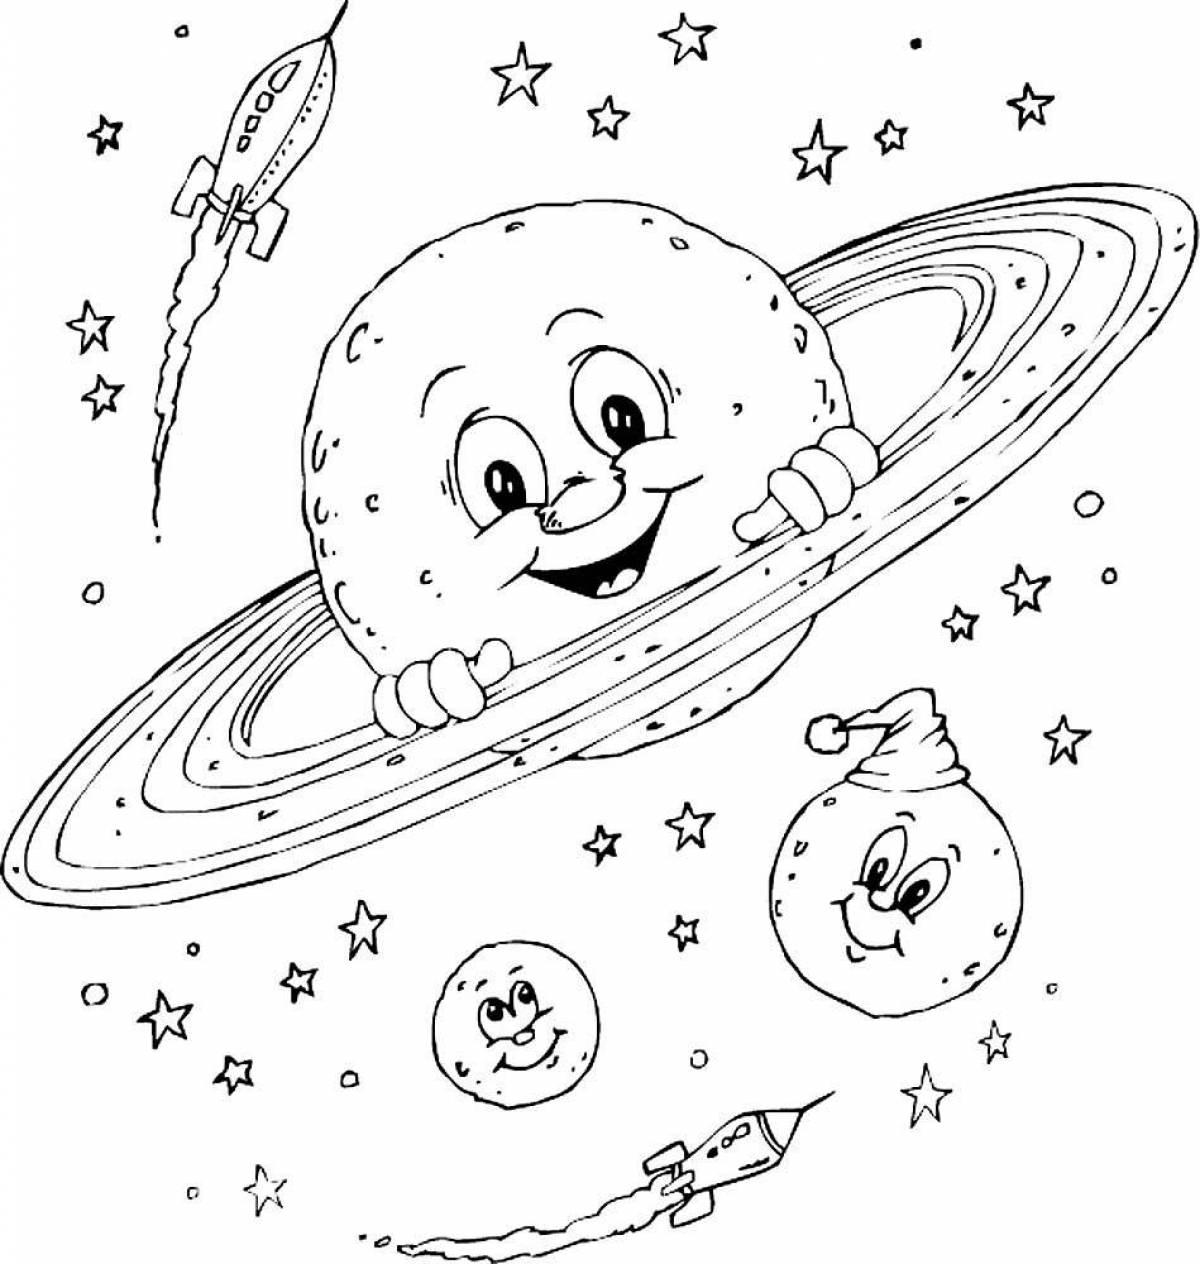 Sky space coloring book for kids